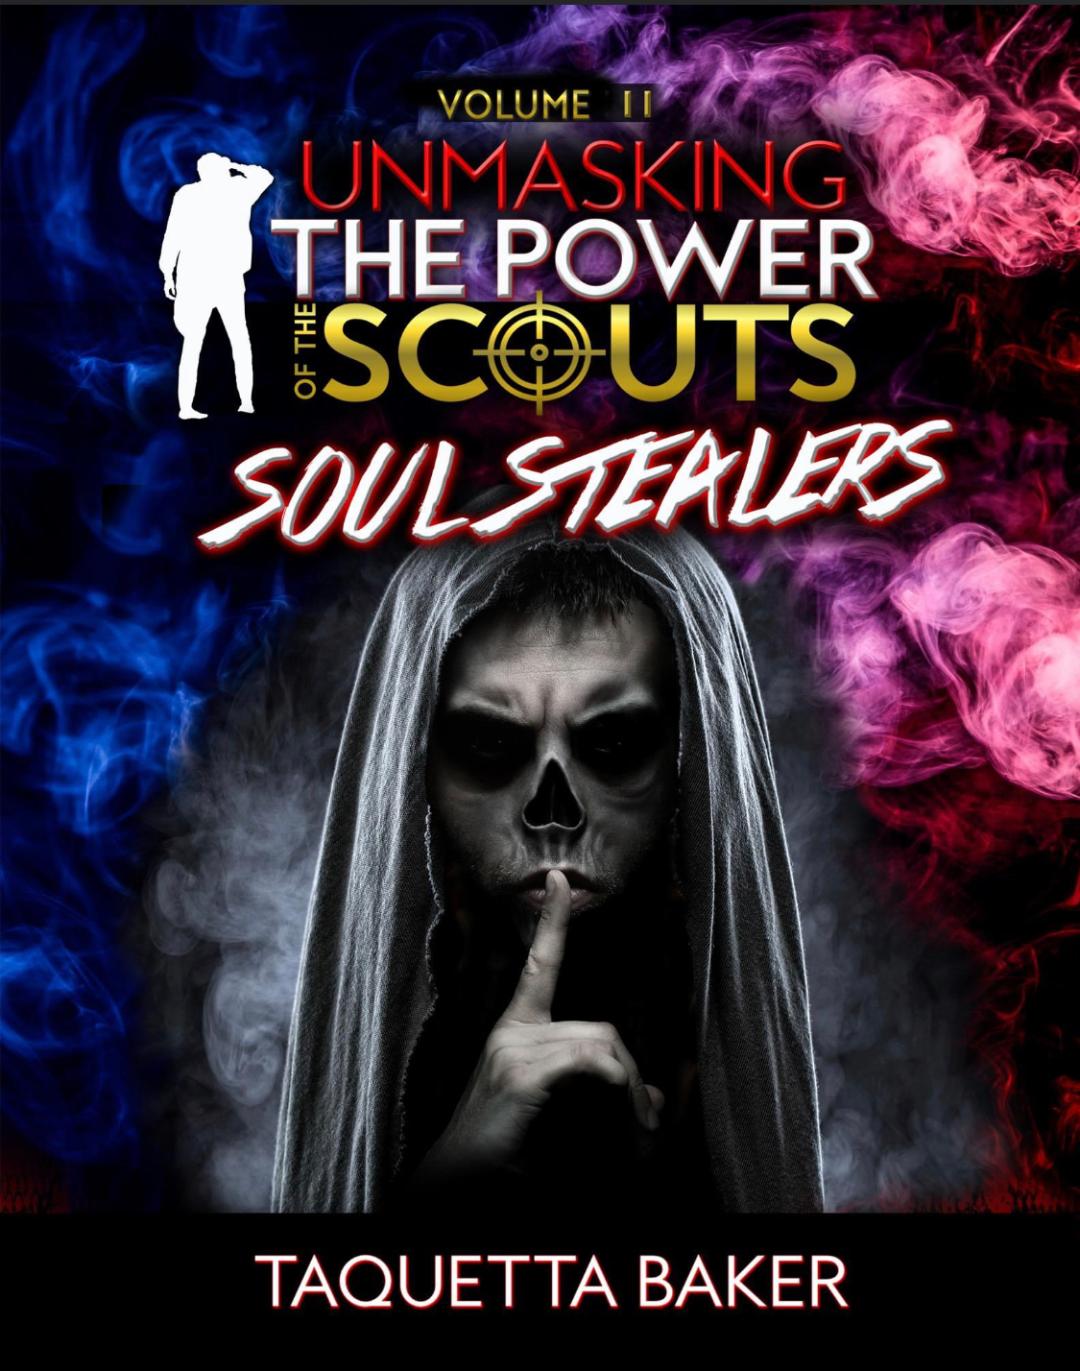 Unmasking the Power of the Scouts Vol II: Soul Stealers